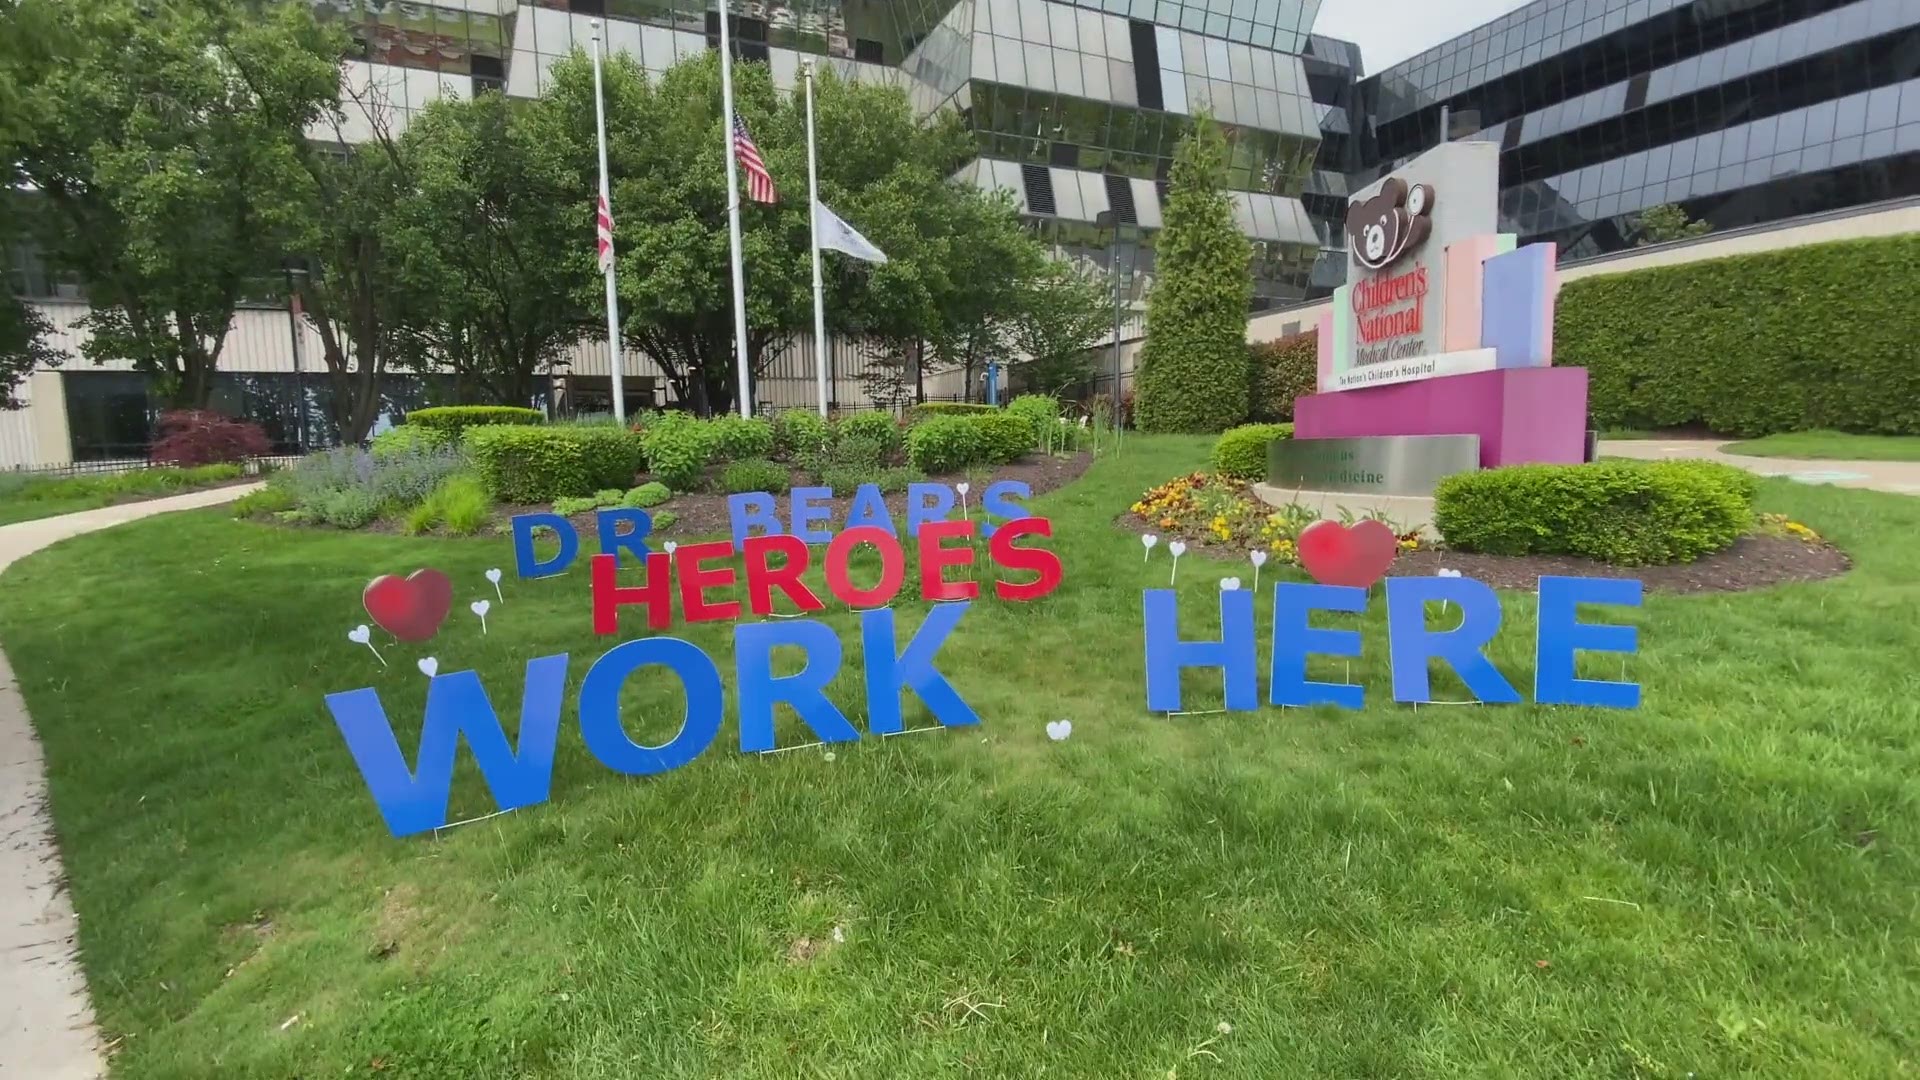 A colorful tribute in front of Children's National Hospital honoring those who work for them that are helping many.